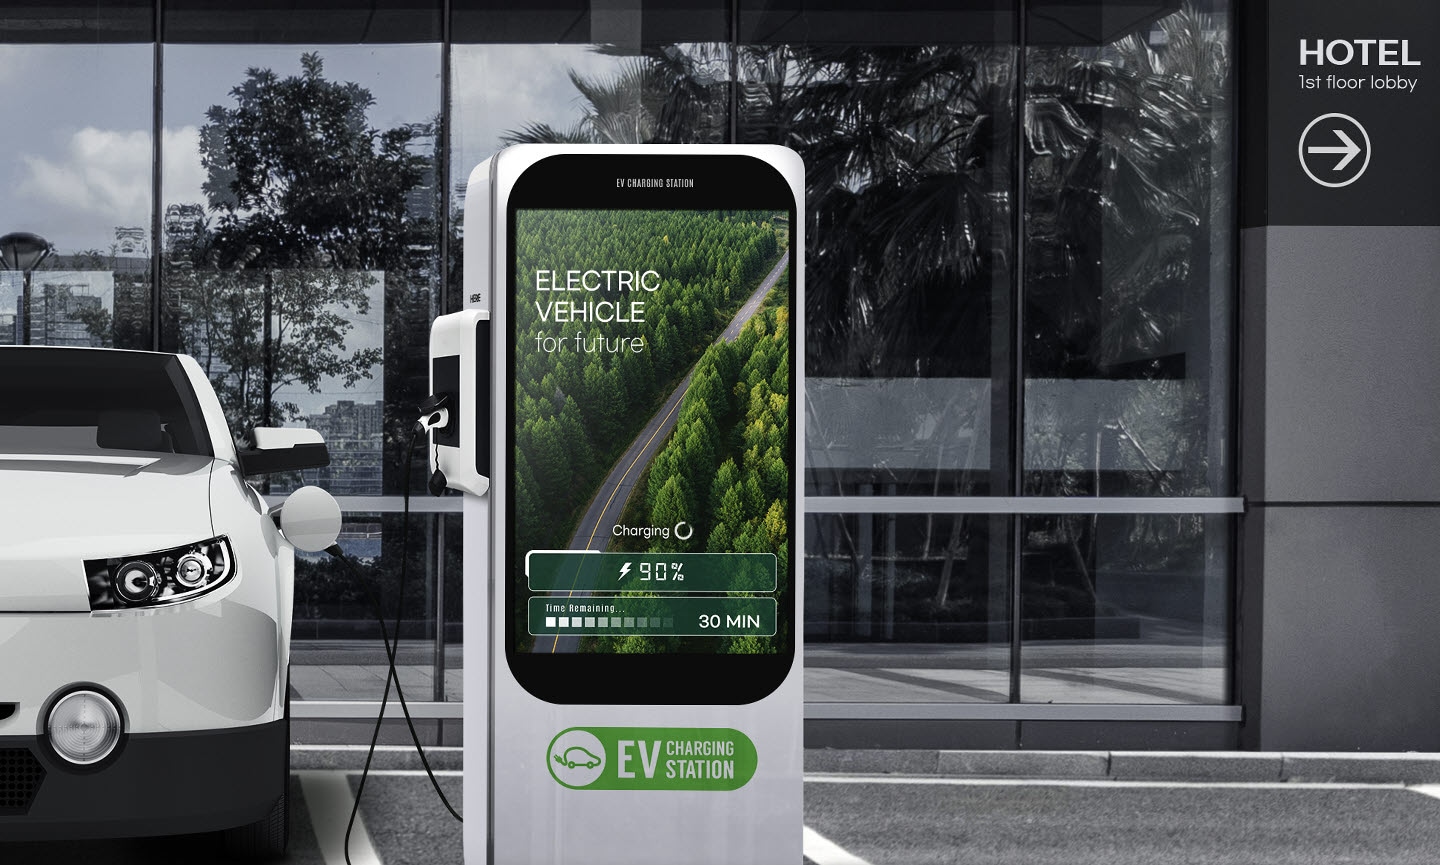 Electric vehicle chargers are installed in the hotel parking lot. On the screen of the electric vehicle charger, along with advertisements related to electric vehicles, it is indicated that 30 minutes remain until charging is complete and that it is 90%